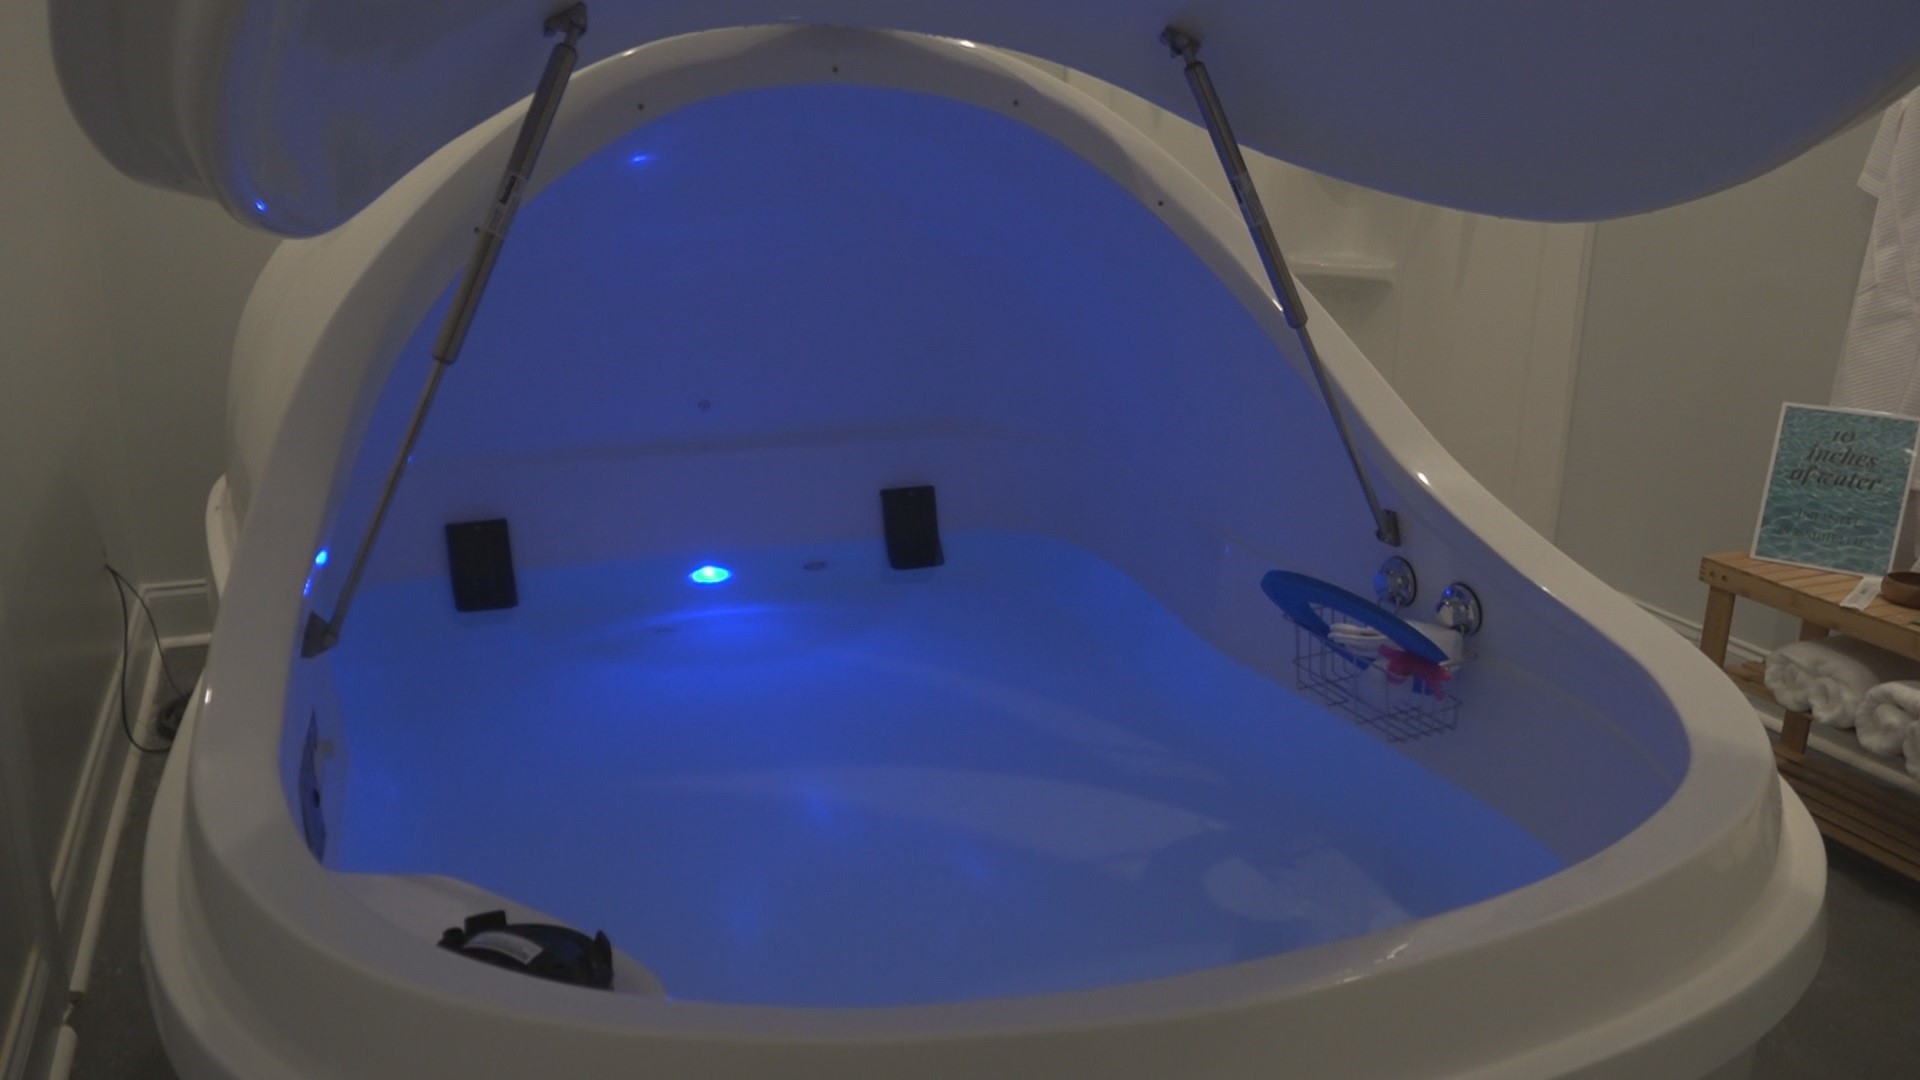 At Royal Oasis Spa in Temple, sensory deprivation tank sessions have become more popular. So, 6 News Anchor Leslie Draffin tried on out.